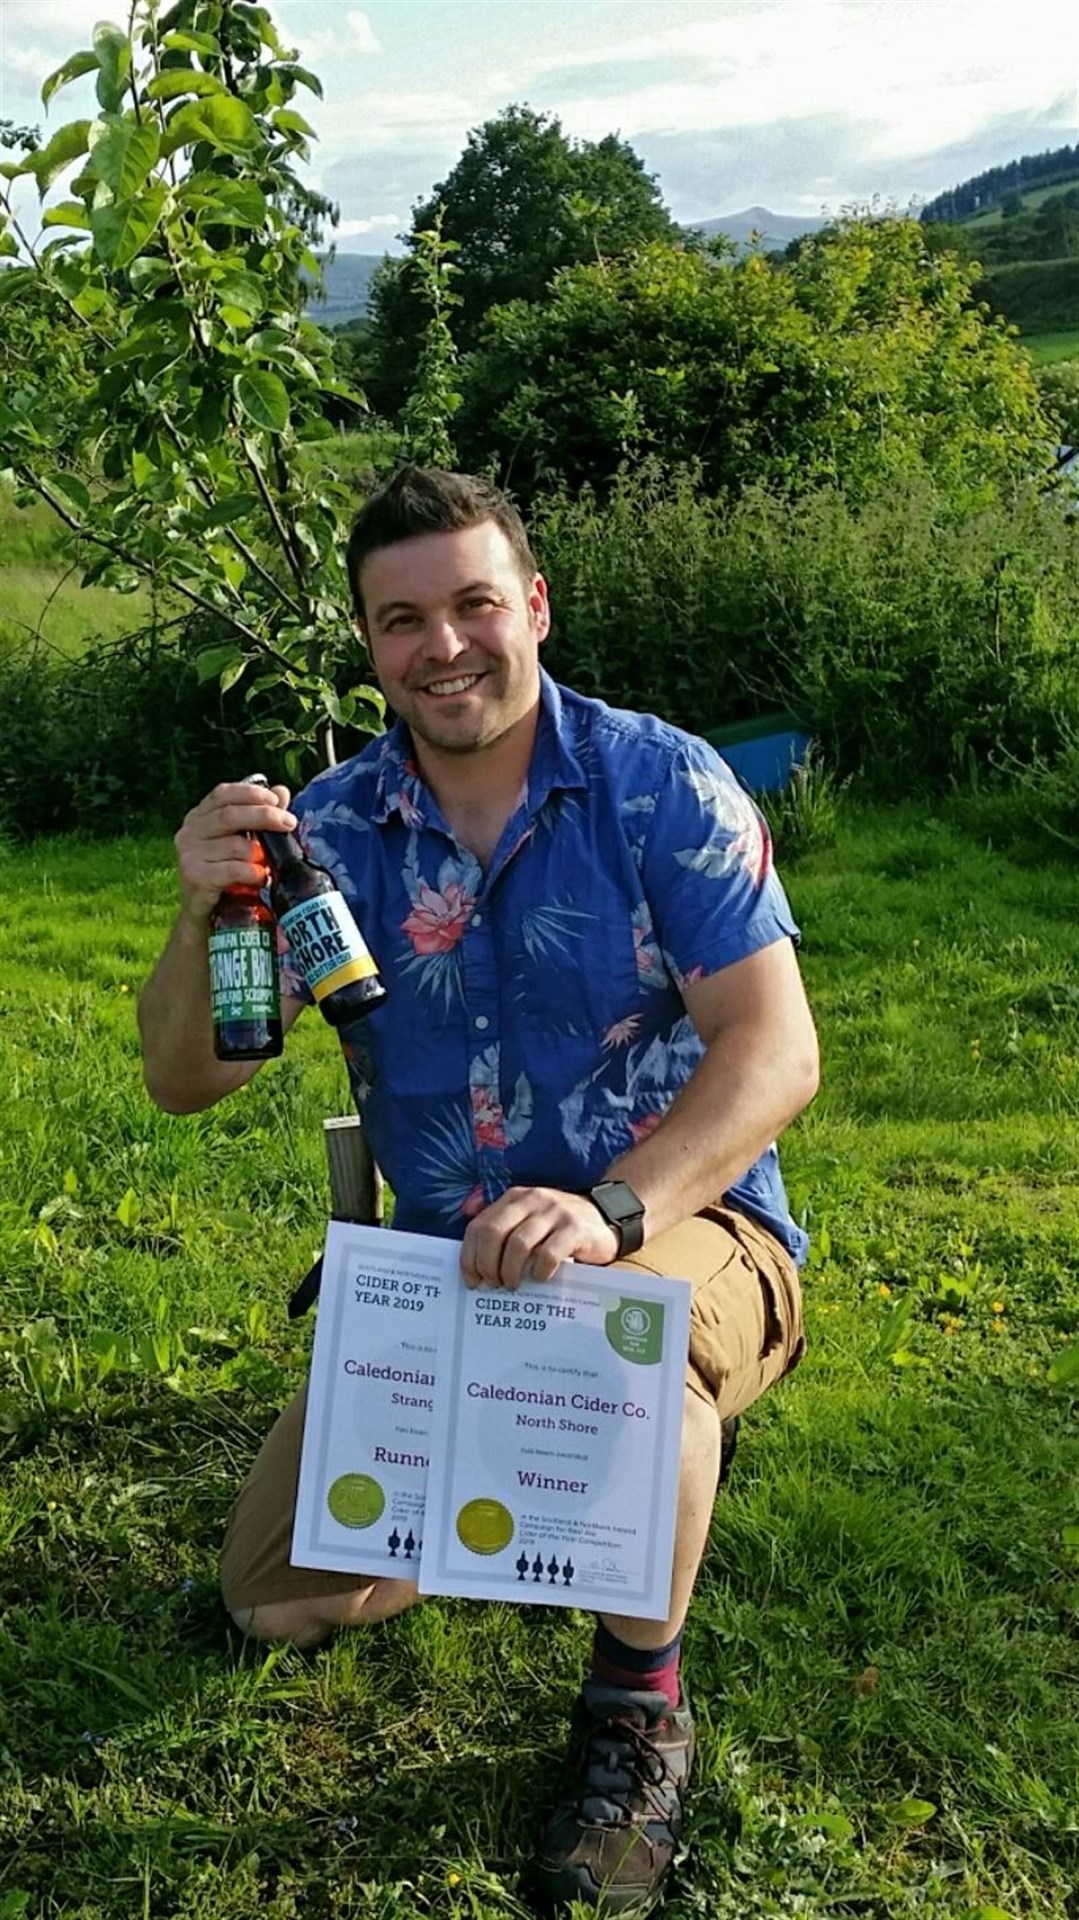 Conon-based Caledonian Cider Co. founder Ryan Sealey toasts another award.